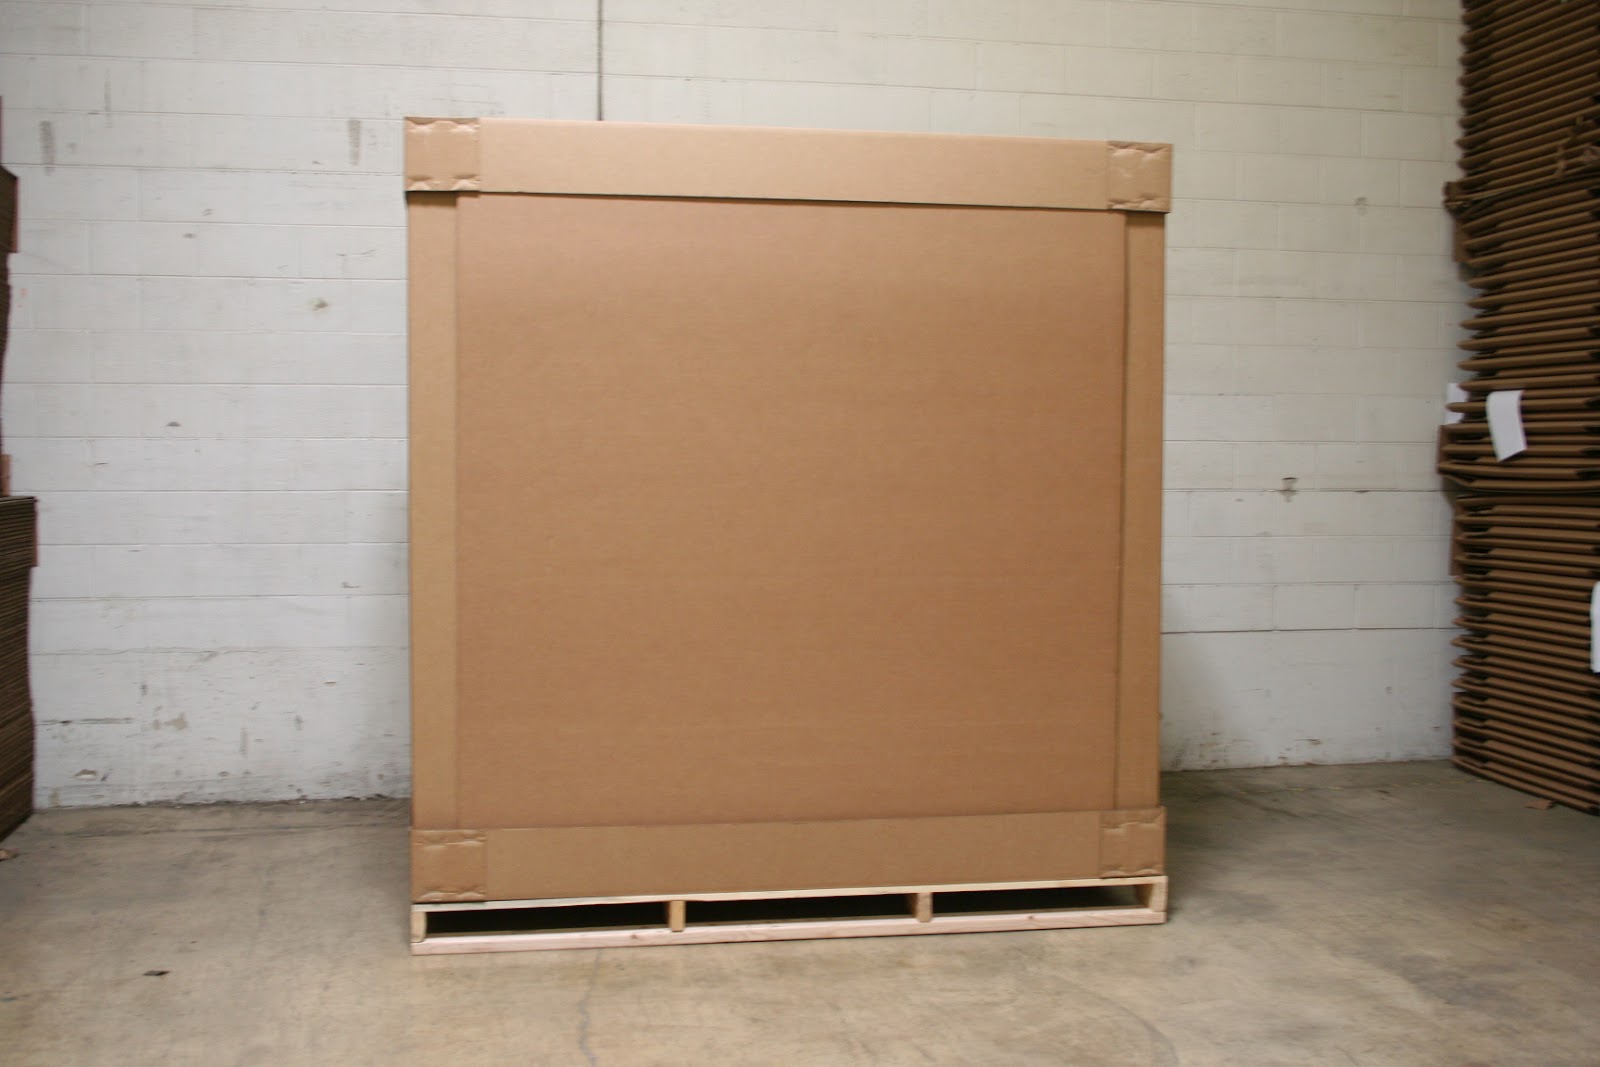 Ox Box Triple Wall Corrugated Large Moving Crate Boxes